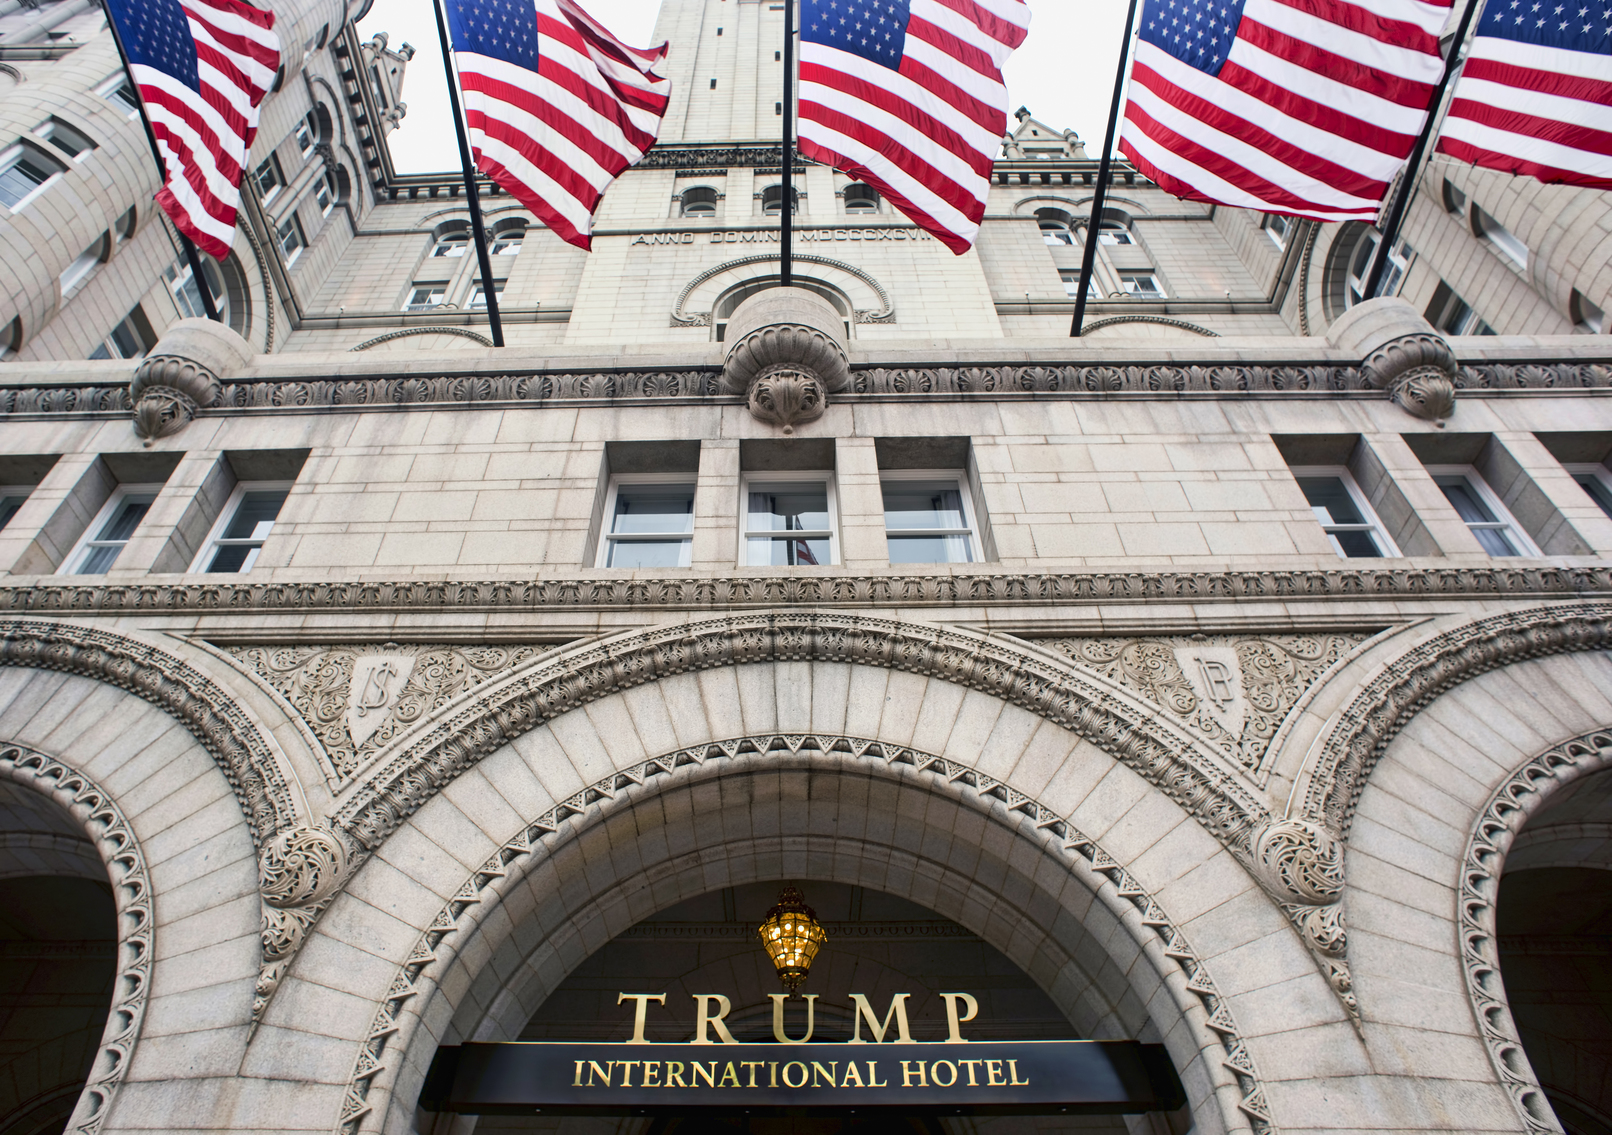 U.S. Court of Appeals for the Fourth Circuit Schedules Rehearing En Banc in Trump Emoluments Lawsuit